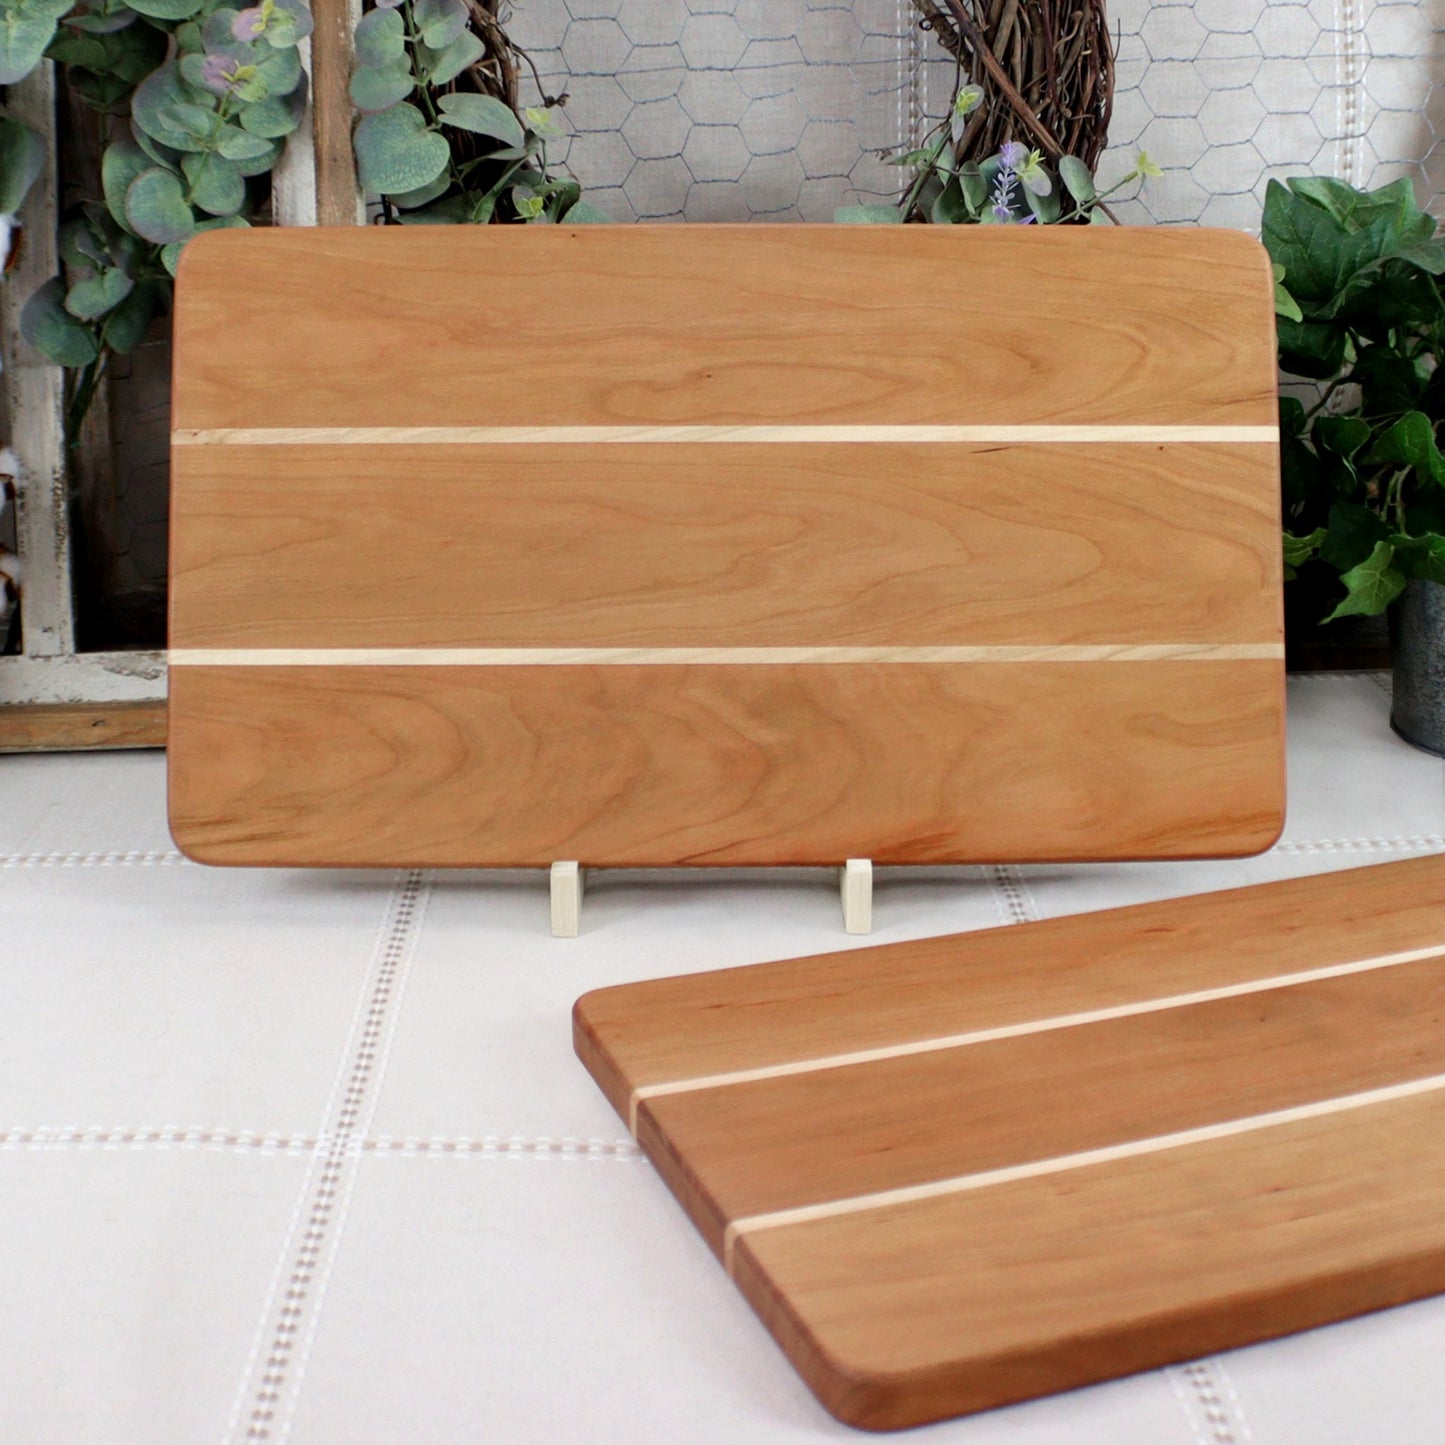 4-PC Cherry Wood Tray, Cutting Board, Wine Carrier & Coaster Set